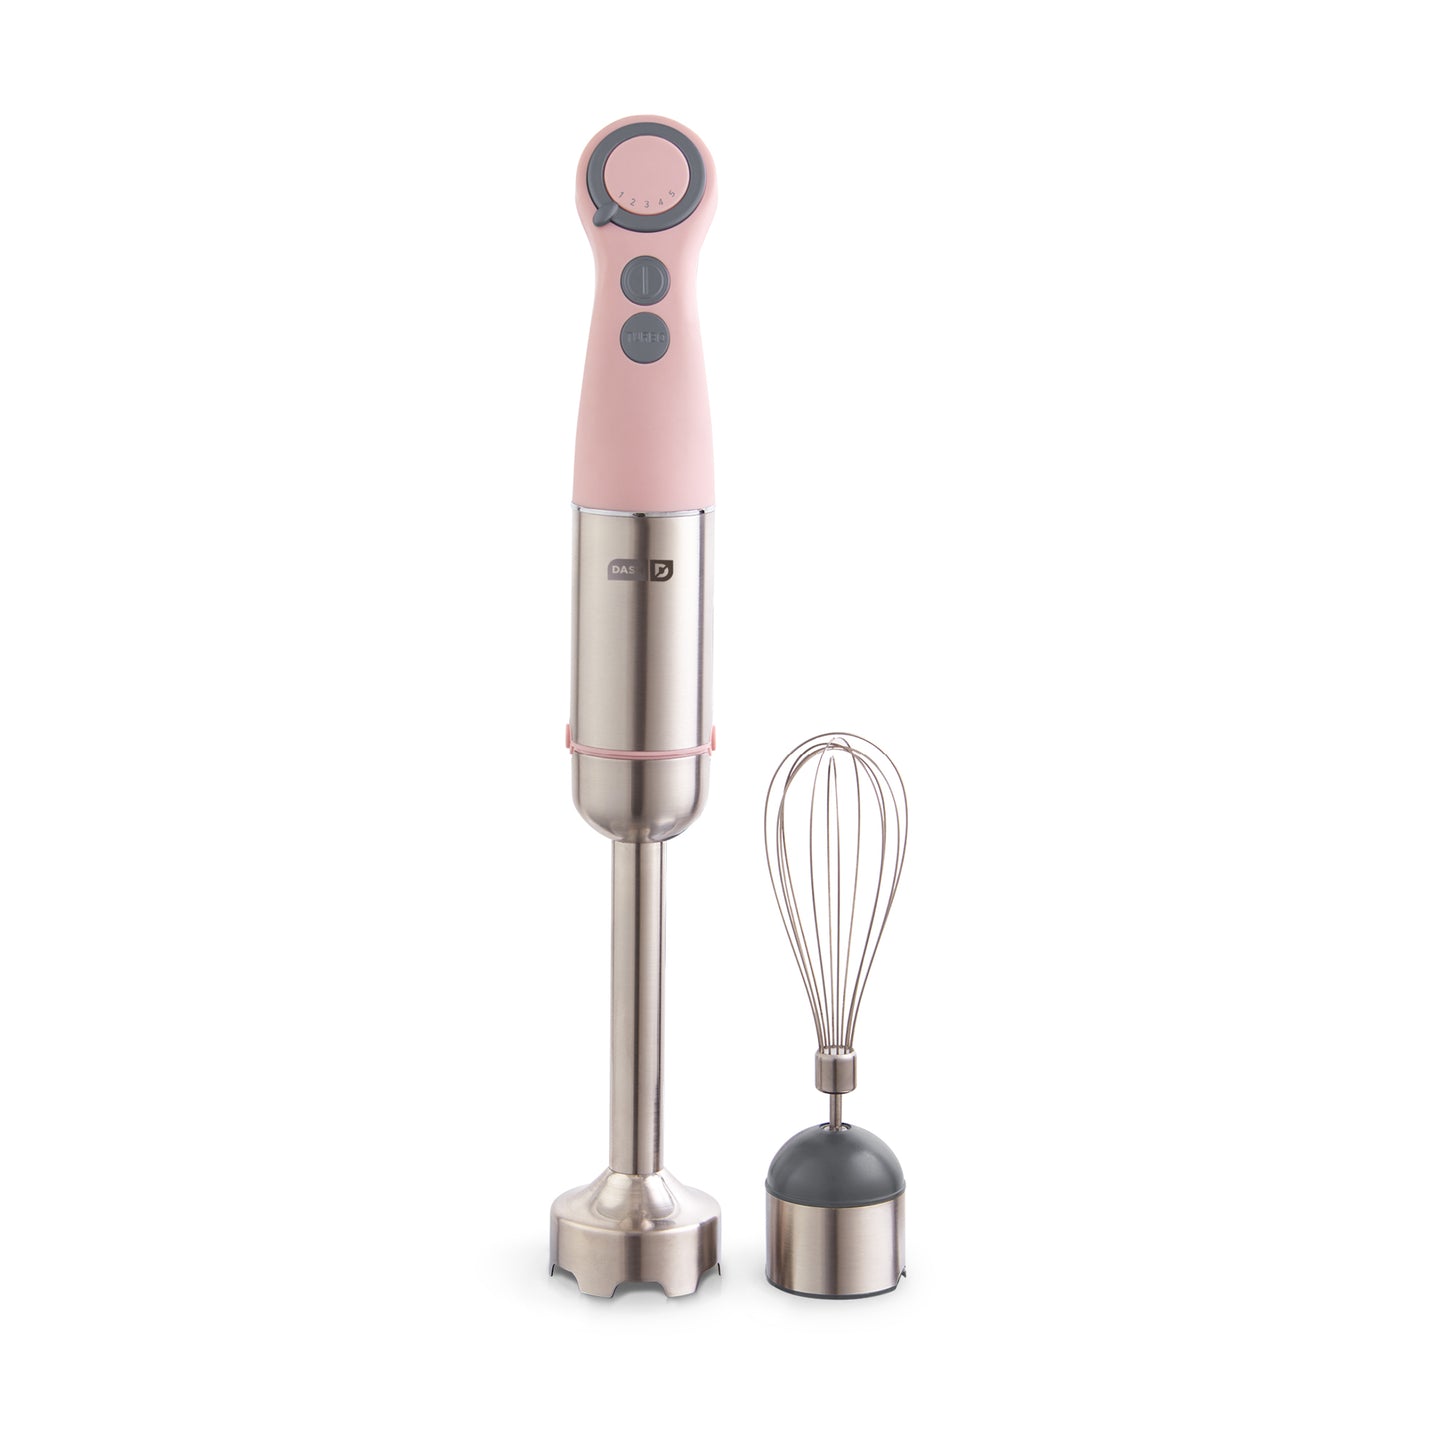 Dash Chef Series Immersion Hand 5 Speed Stick Blender with Stainless Steel Blades, Whisk Attachment and Recipe Guide, Pink